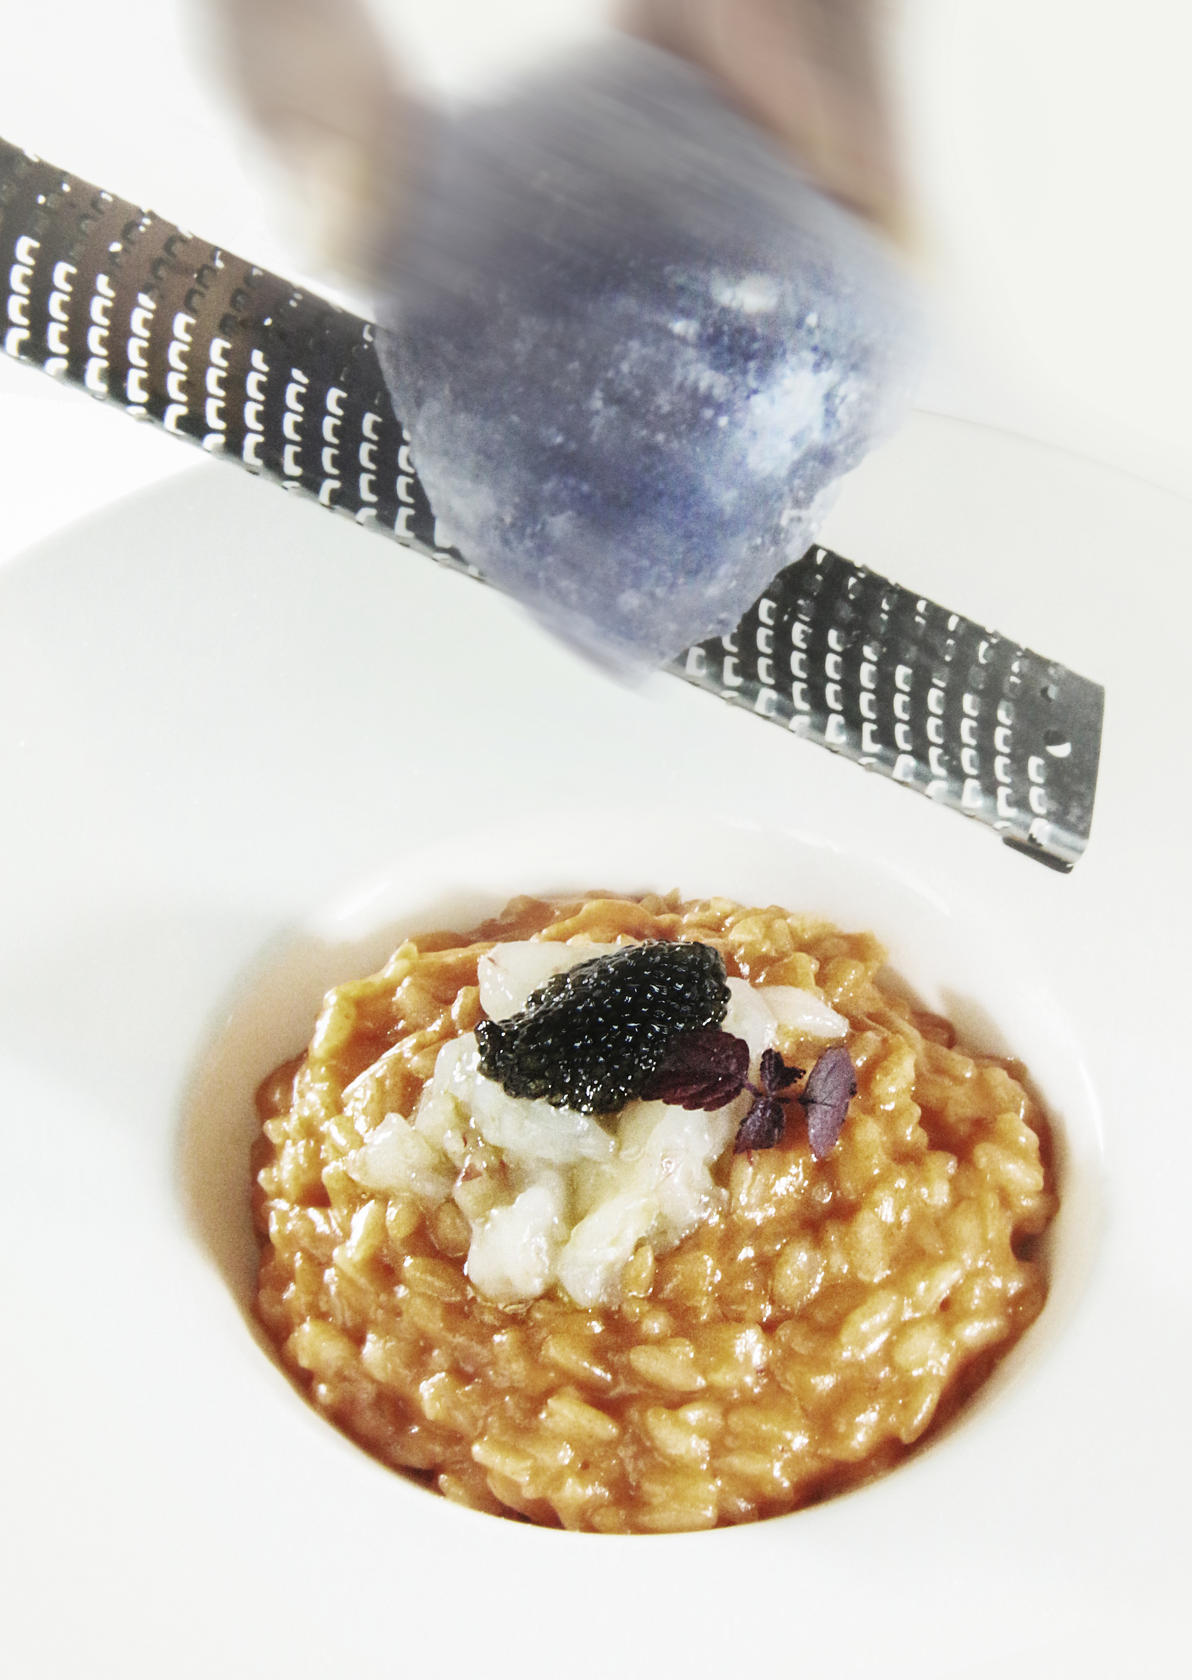 Persian blue salt is grated over red prawn risotto with malossol caviar at Aqua Armani.